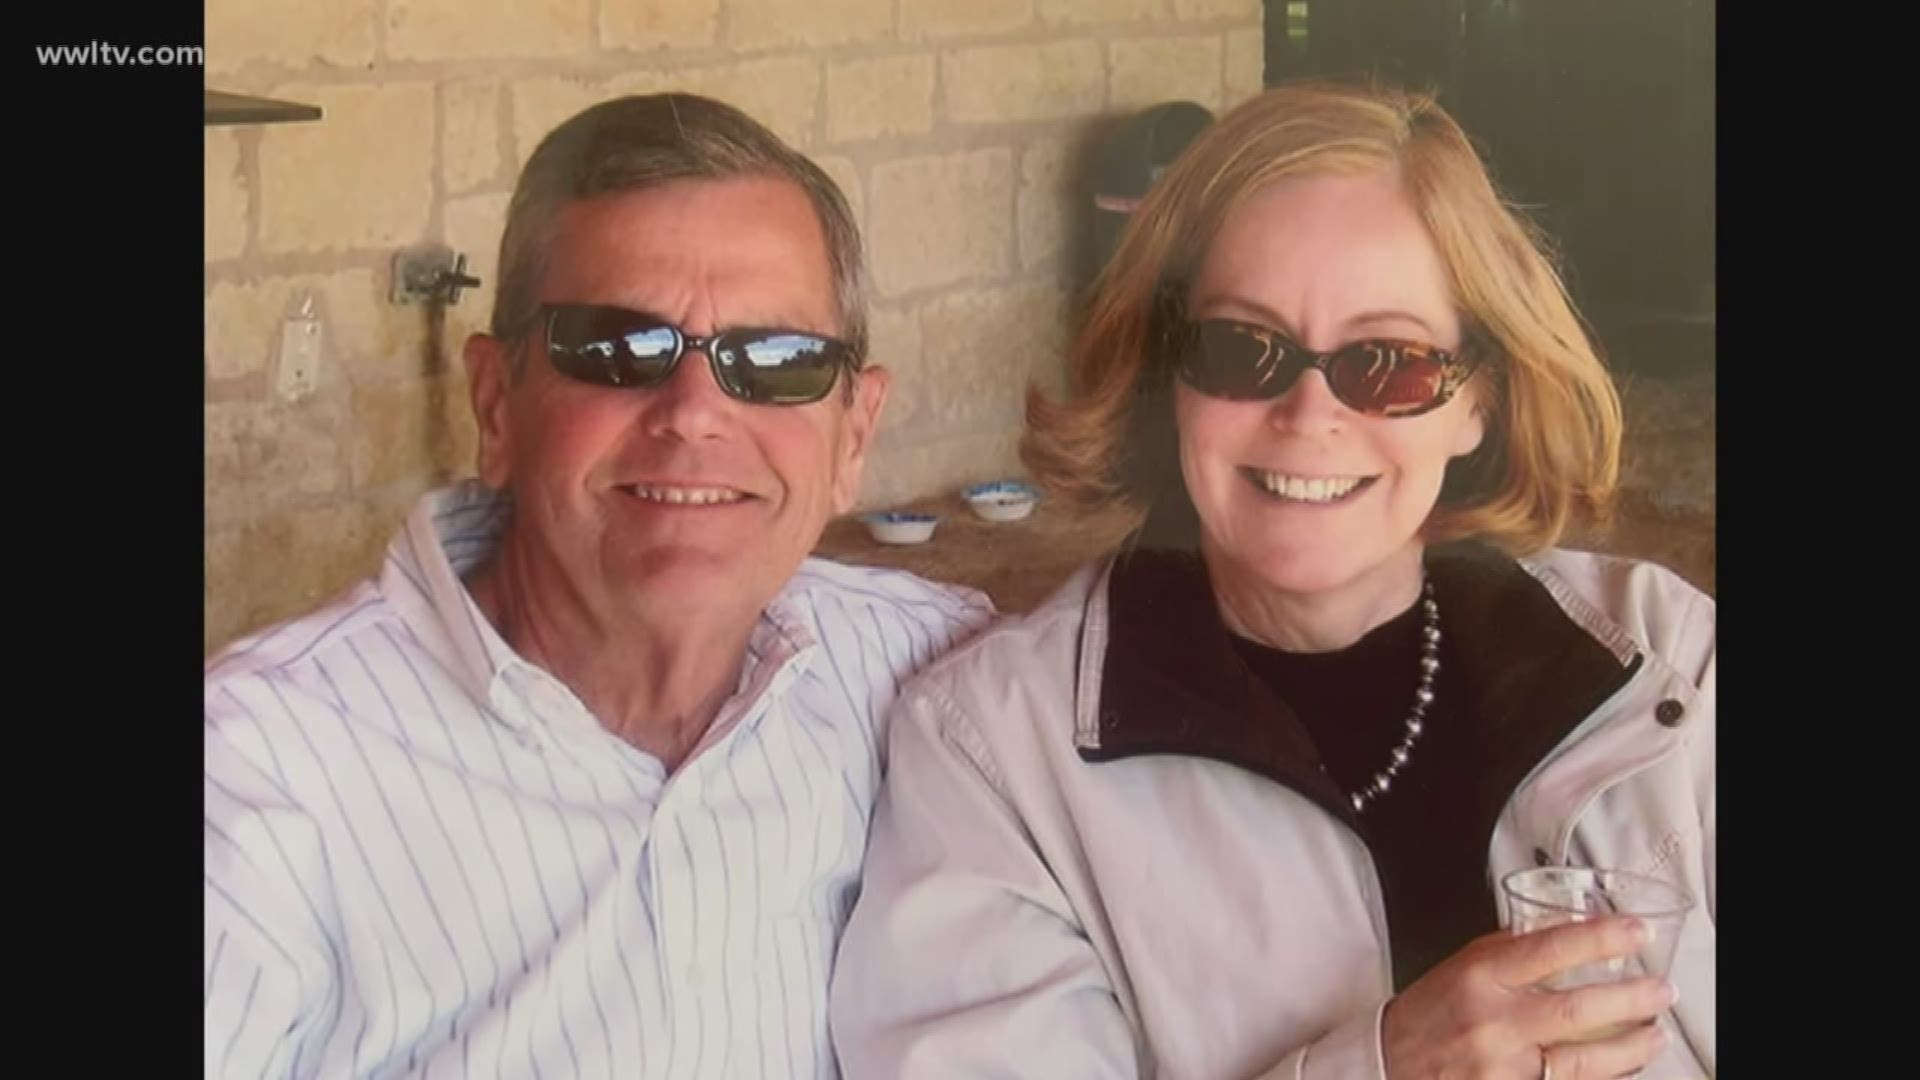 Tonight, the wife of Judge Jim Carriere is talking to WWLTV exclusively about her husband who lost his life to COVID-19.